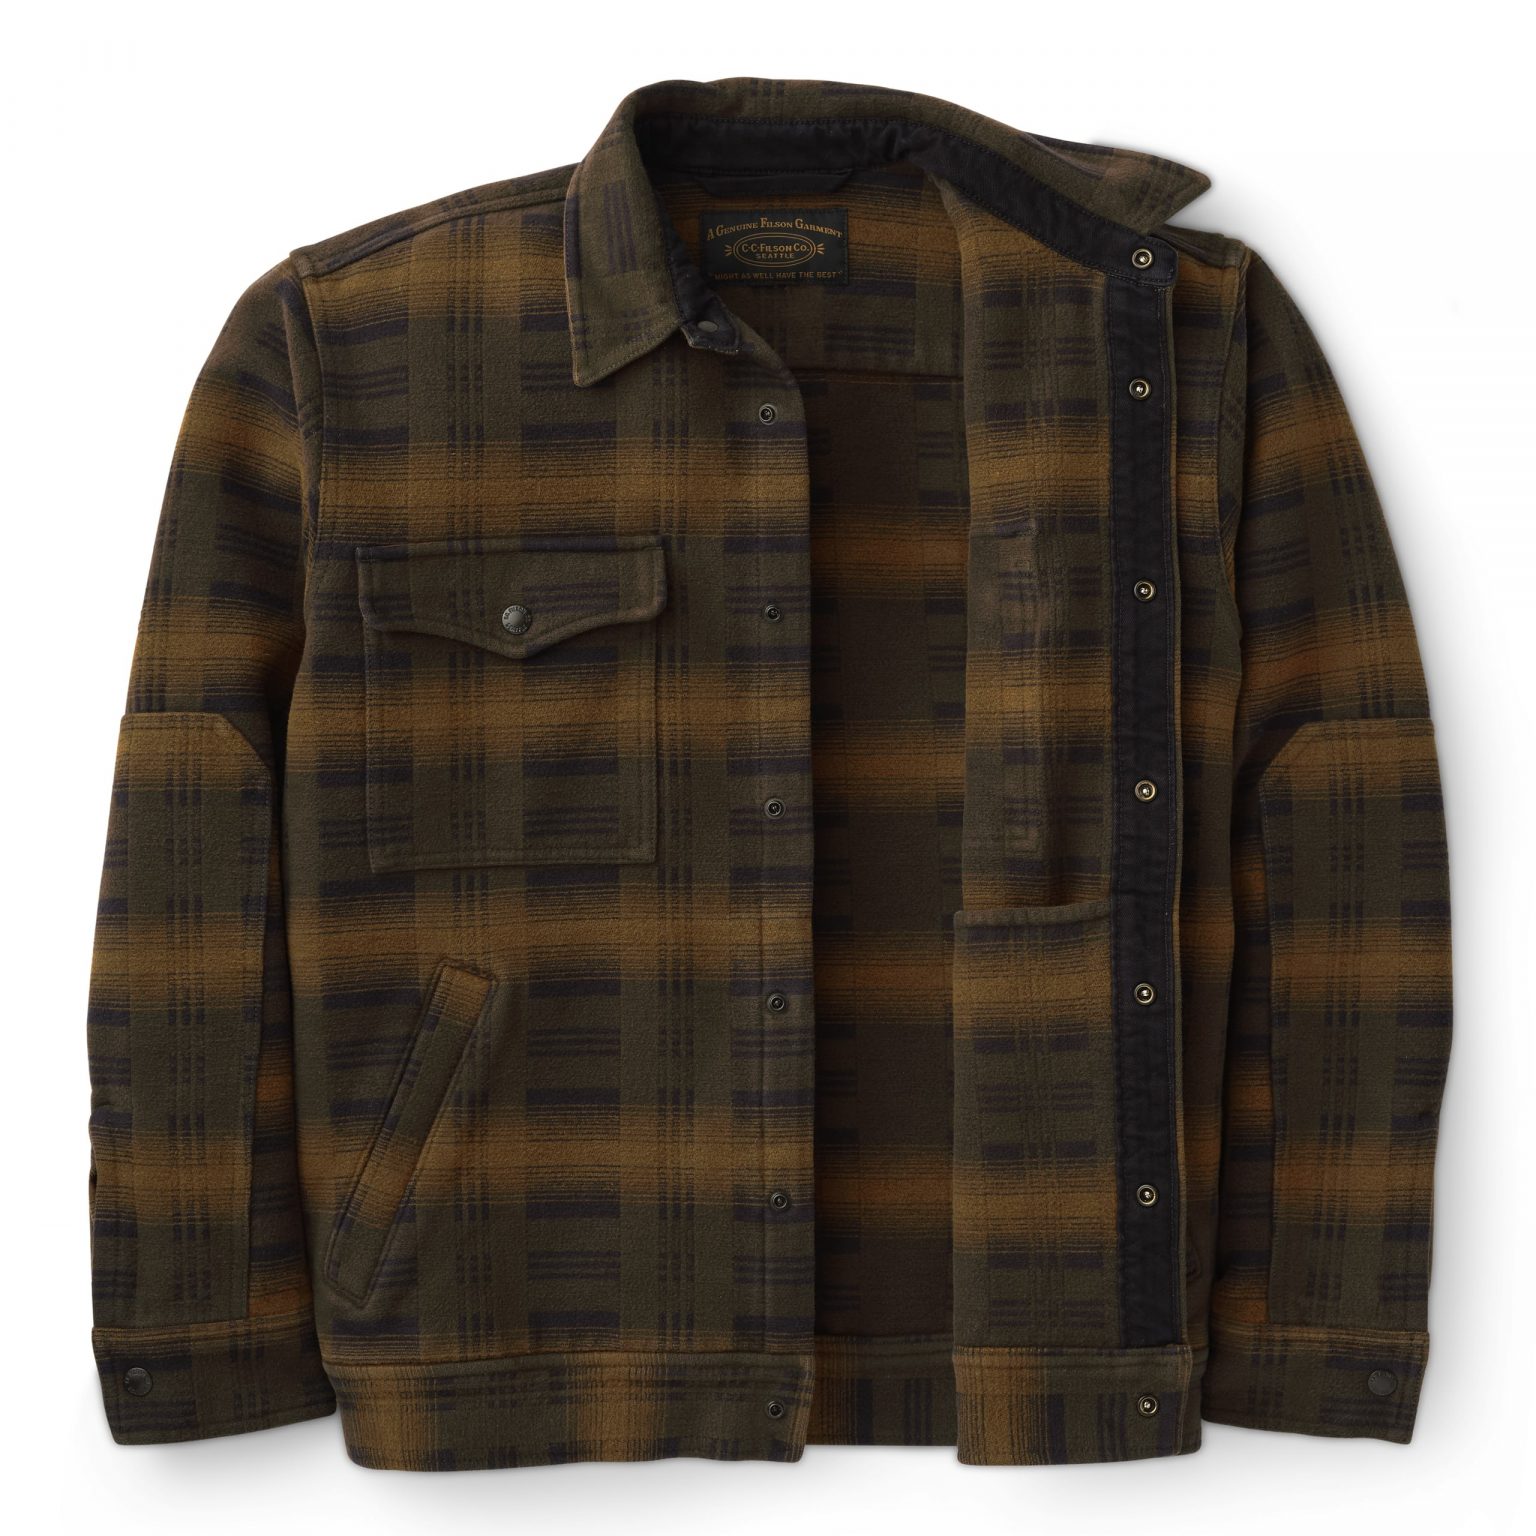 8 of the best men’s trucker jackets for winter | The Coolector